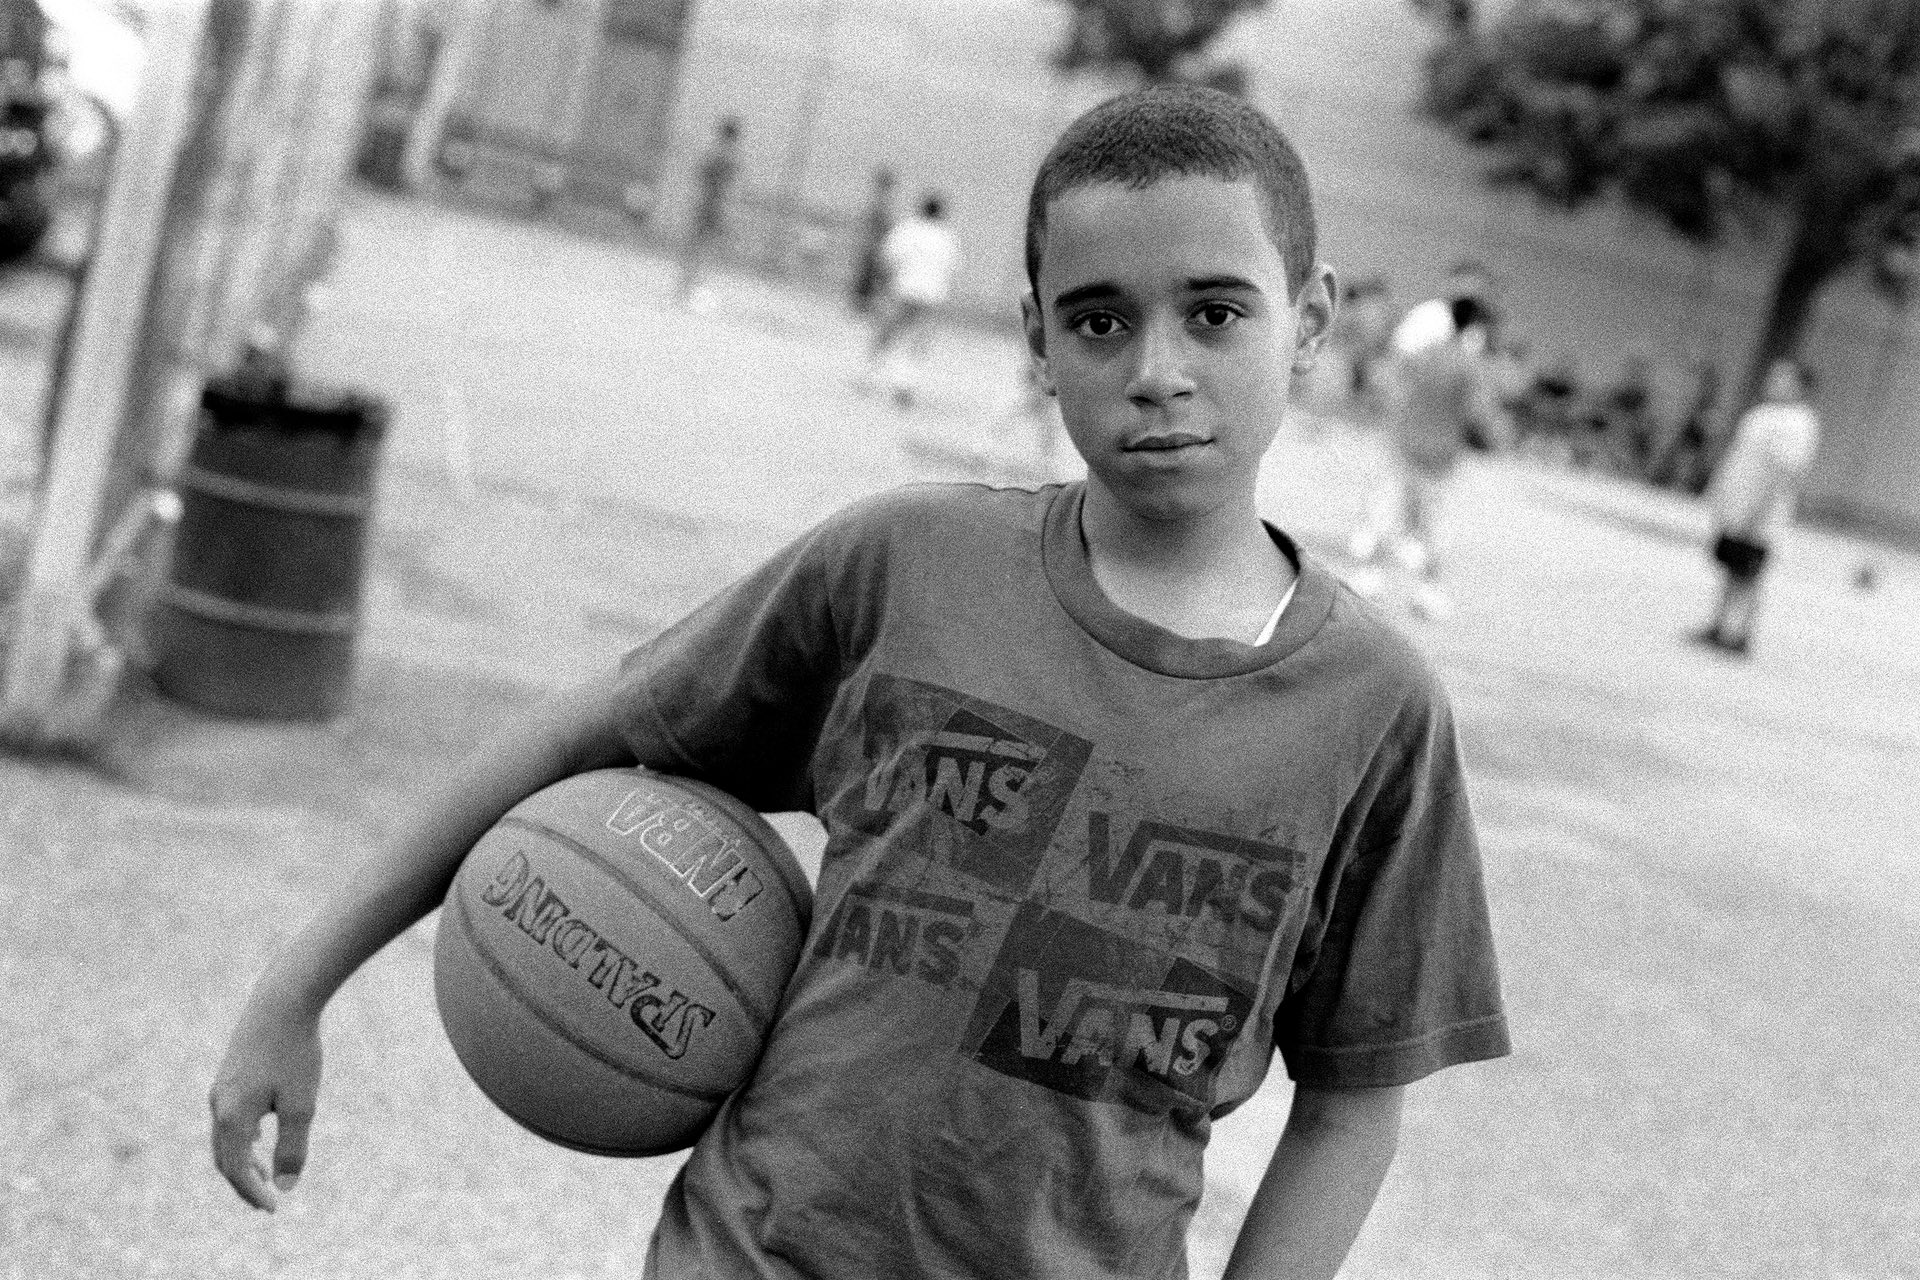 Young basketball player in the park before Friday prayers, Brooklyn, 2011. PHOTO: ROBERT GERHARDT